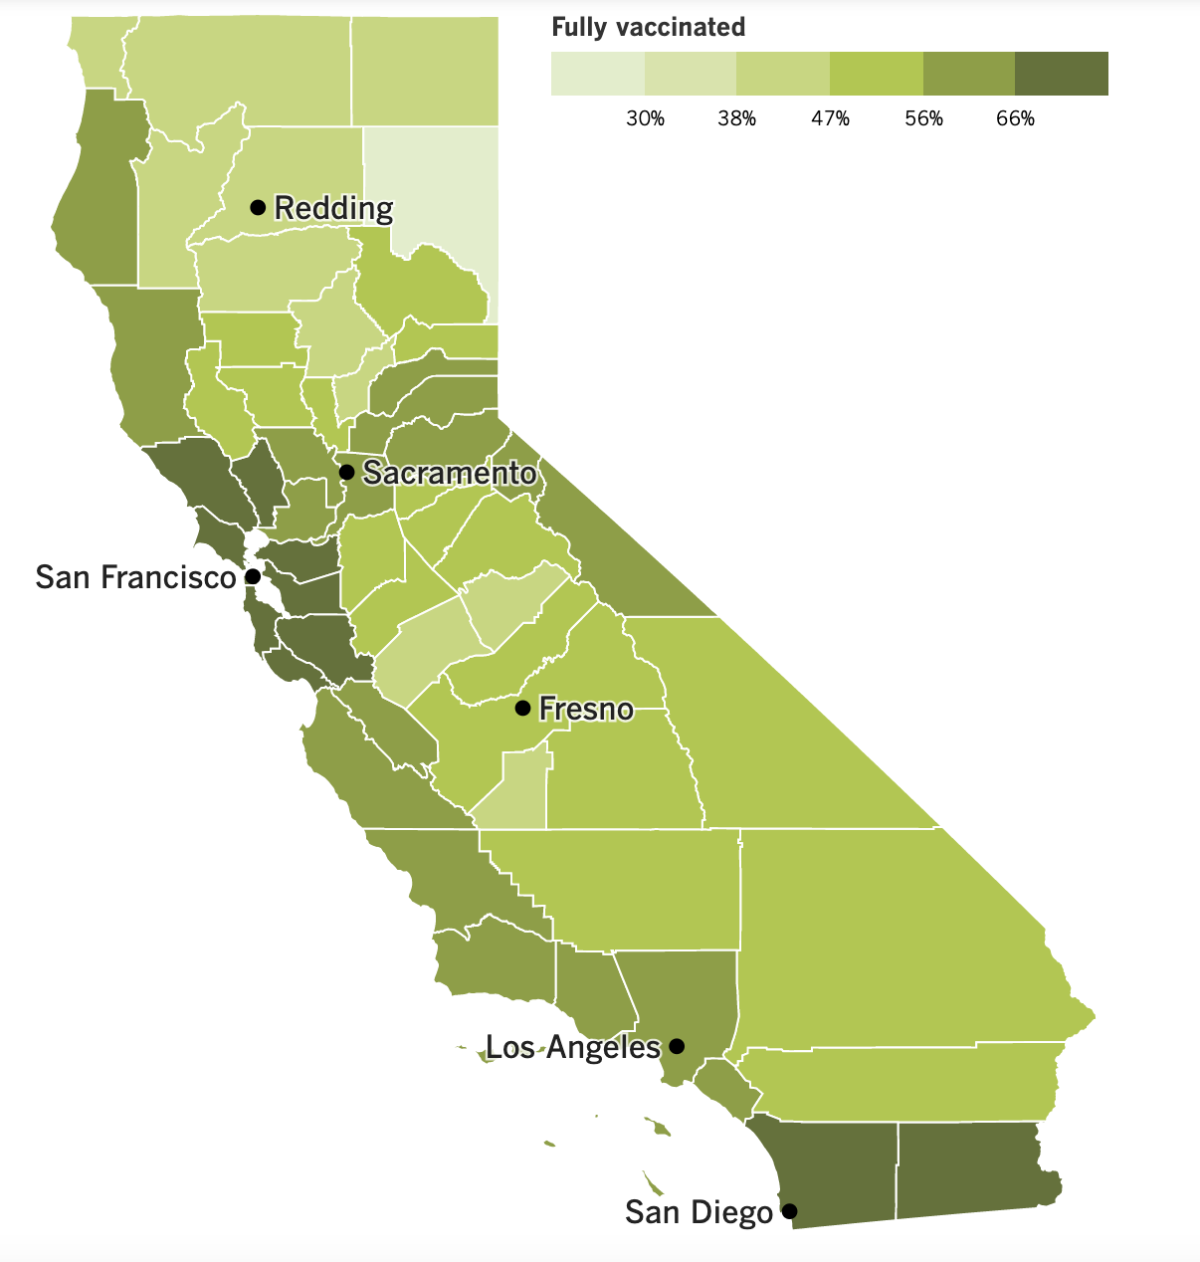 A map showing California's vaccination progress by county.